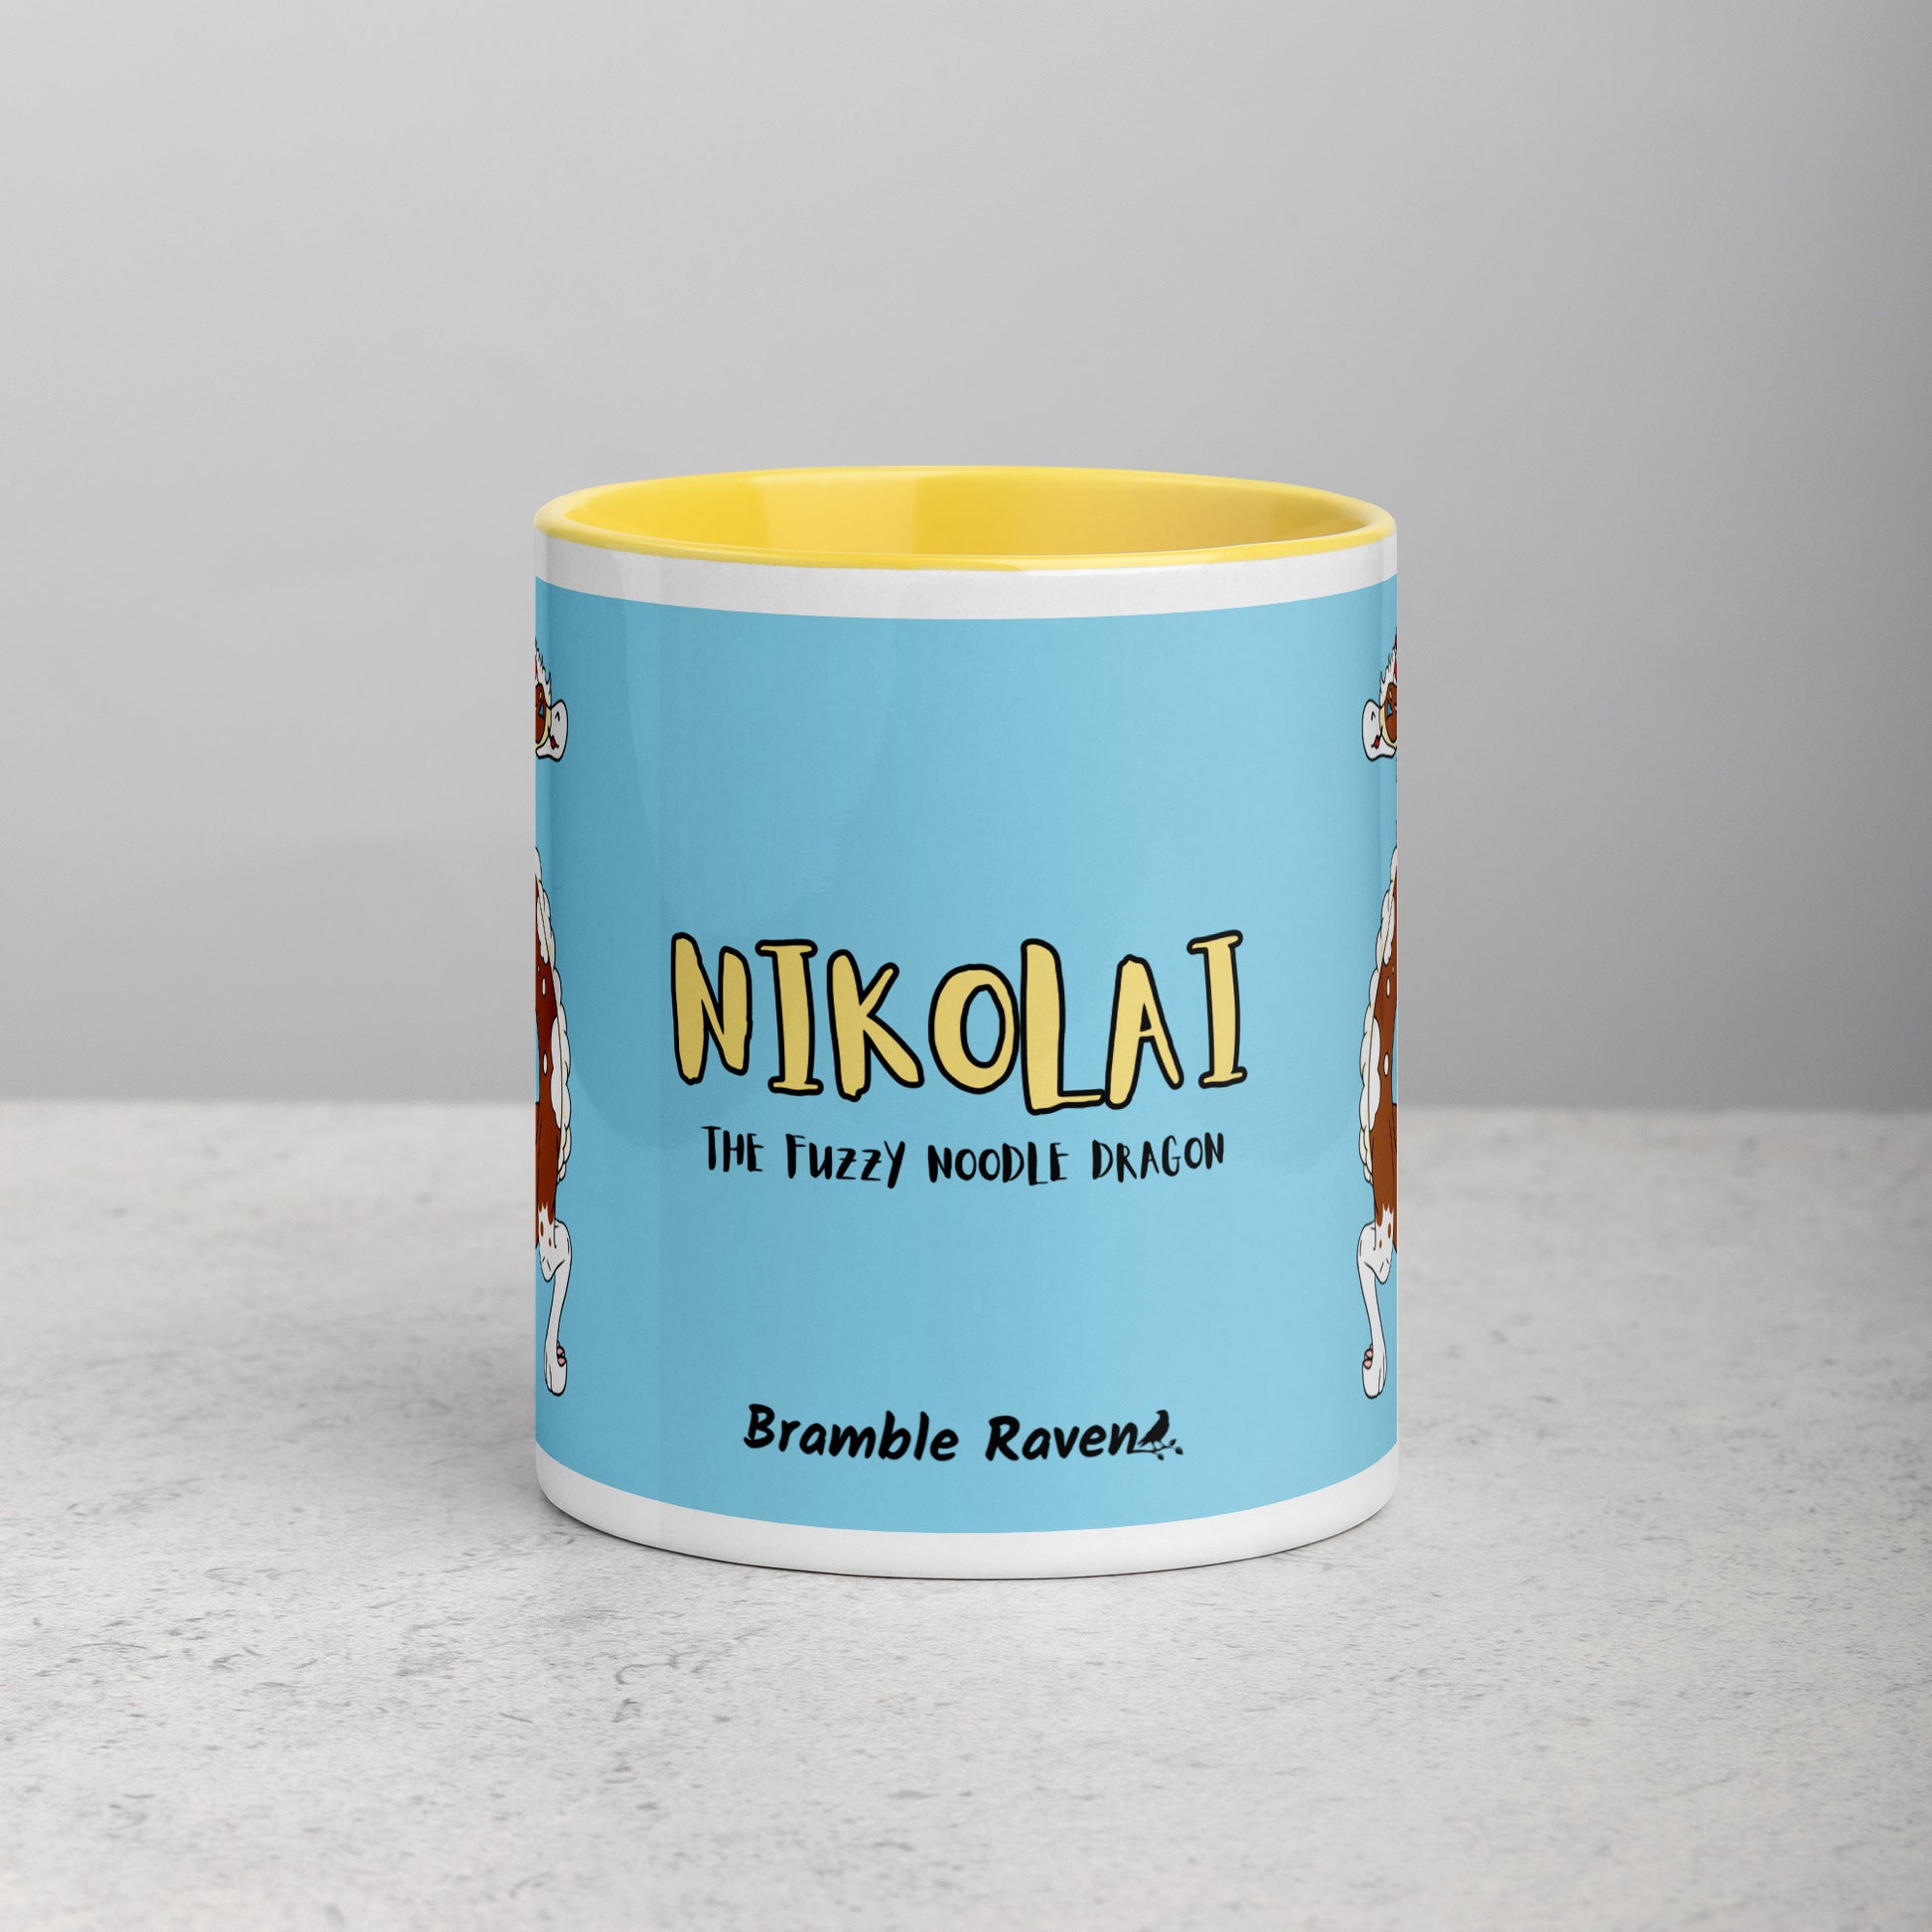 11 ounce ceramic mug with yellow handle, rim and inside color. Features double-sided image of Nikolai the Fuzzy Noodle Root beer float dragon on a light blue background. Mug is microwave and dishwasher safe. Front view shows Nikolai the Fuzzy Noodle Dragon text and Bramble Raven logo.